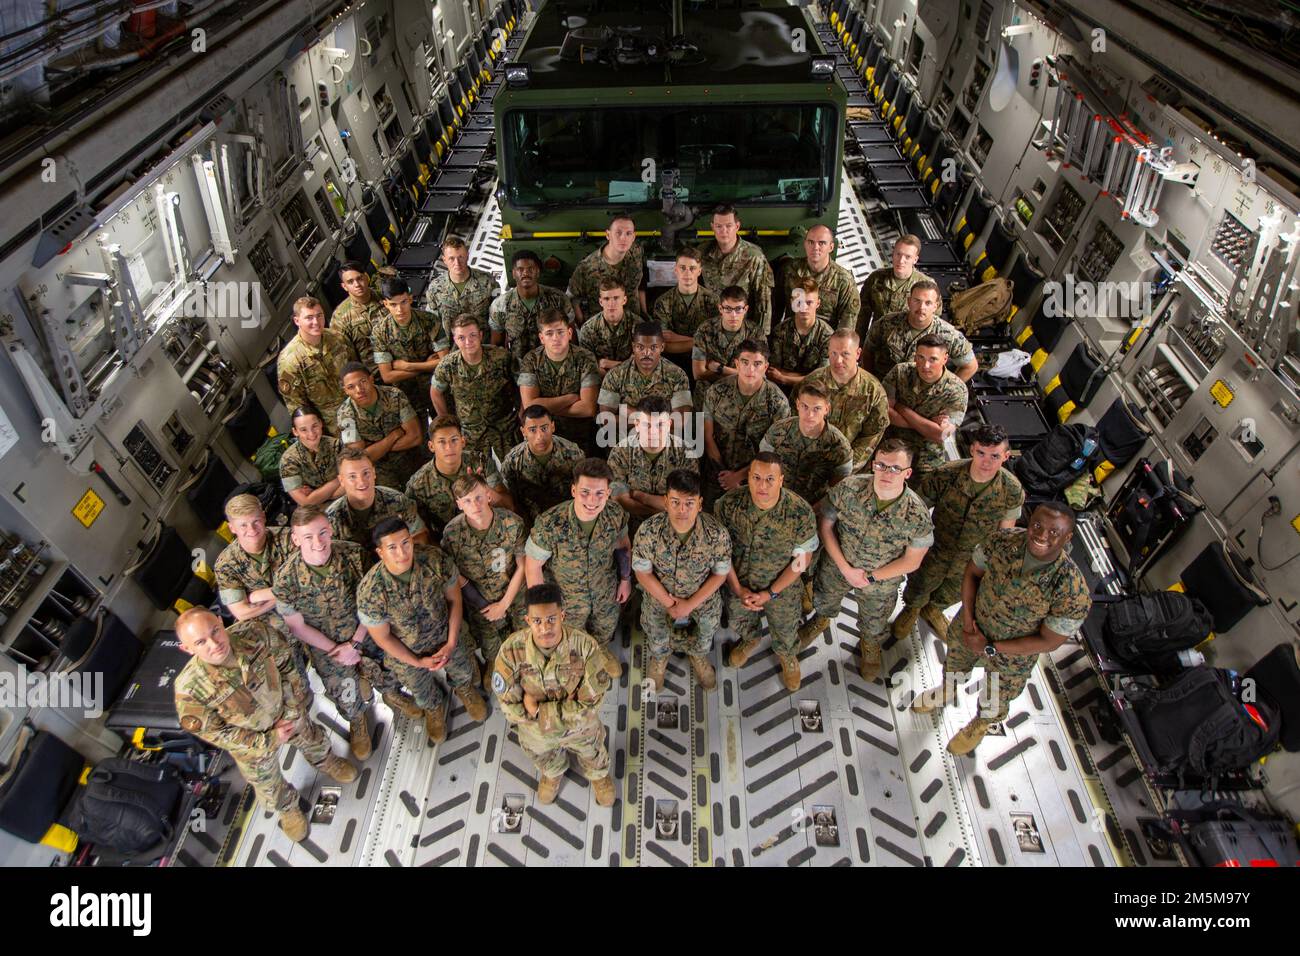 U.S. Marines with Marine Wing Support Squadron 271 and U.S. Airmen with 16th Airlift Squadron pose for a group photo on a C-17 Globemaster III during Strategic Mobility Exercise (STRATMOBEX) 22-1 at Marine Corps Air Station Cherry Point, North Carolina, March 24, 2022. STRATMOBEX 22-1 increased deployment readiness of unit mobility and embarkation capabilities in a joint environment. Stock Photo